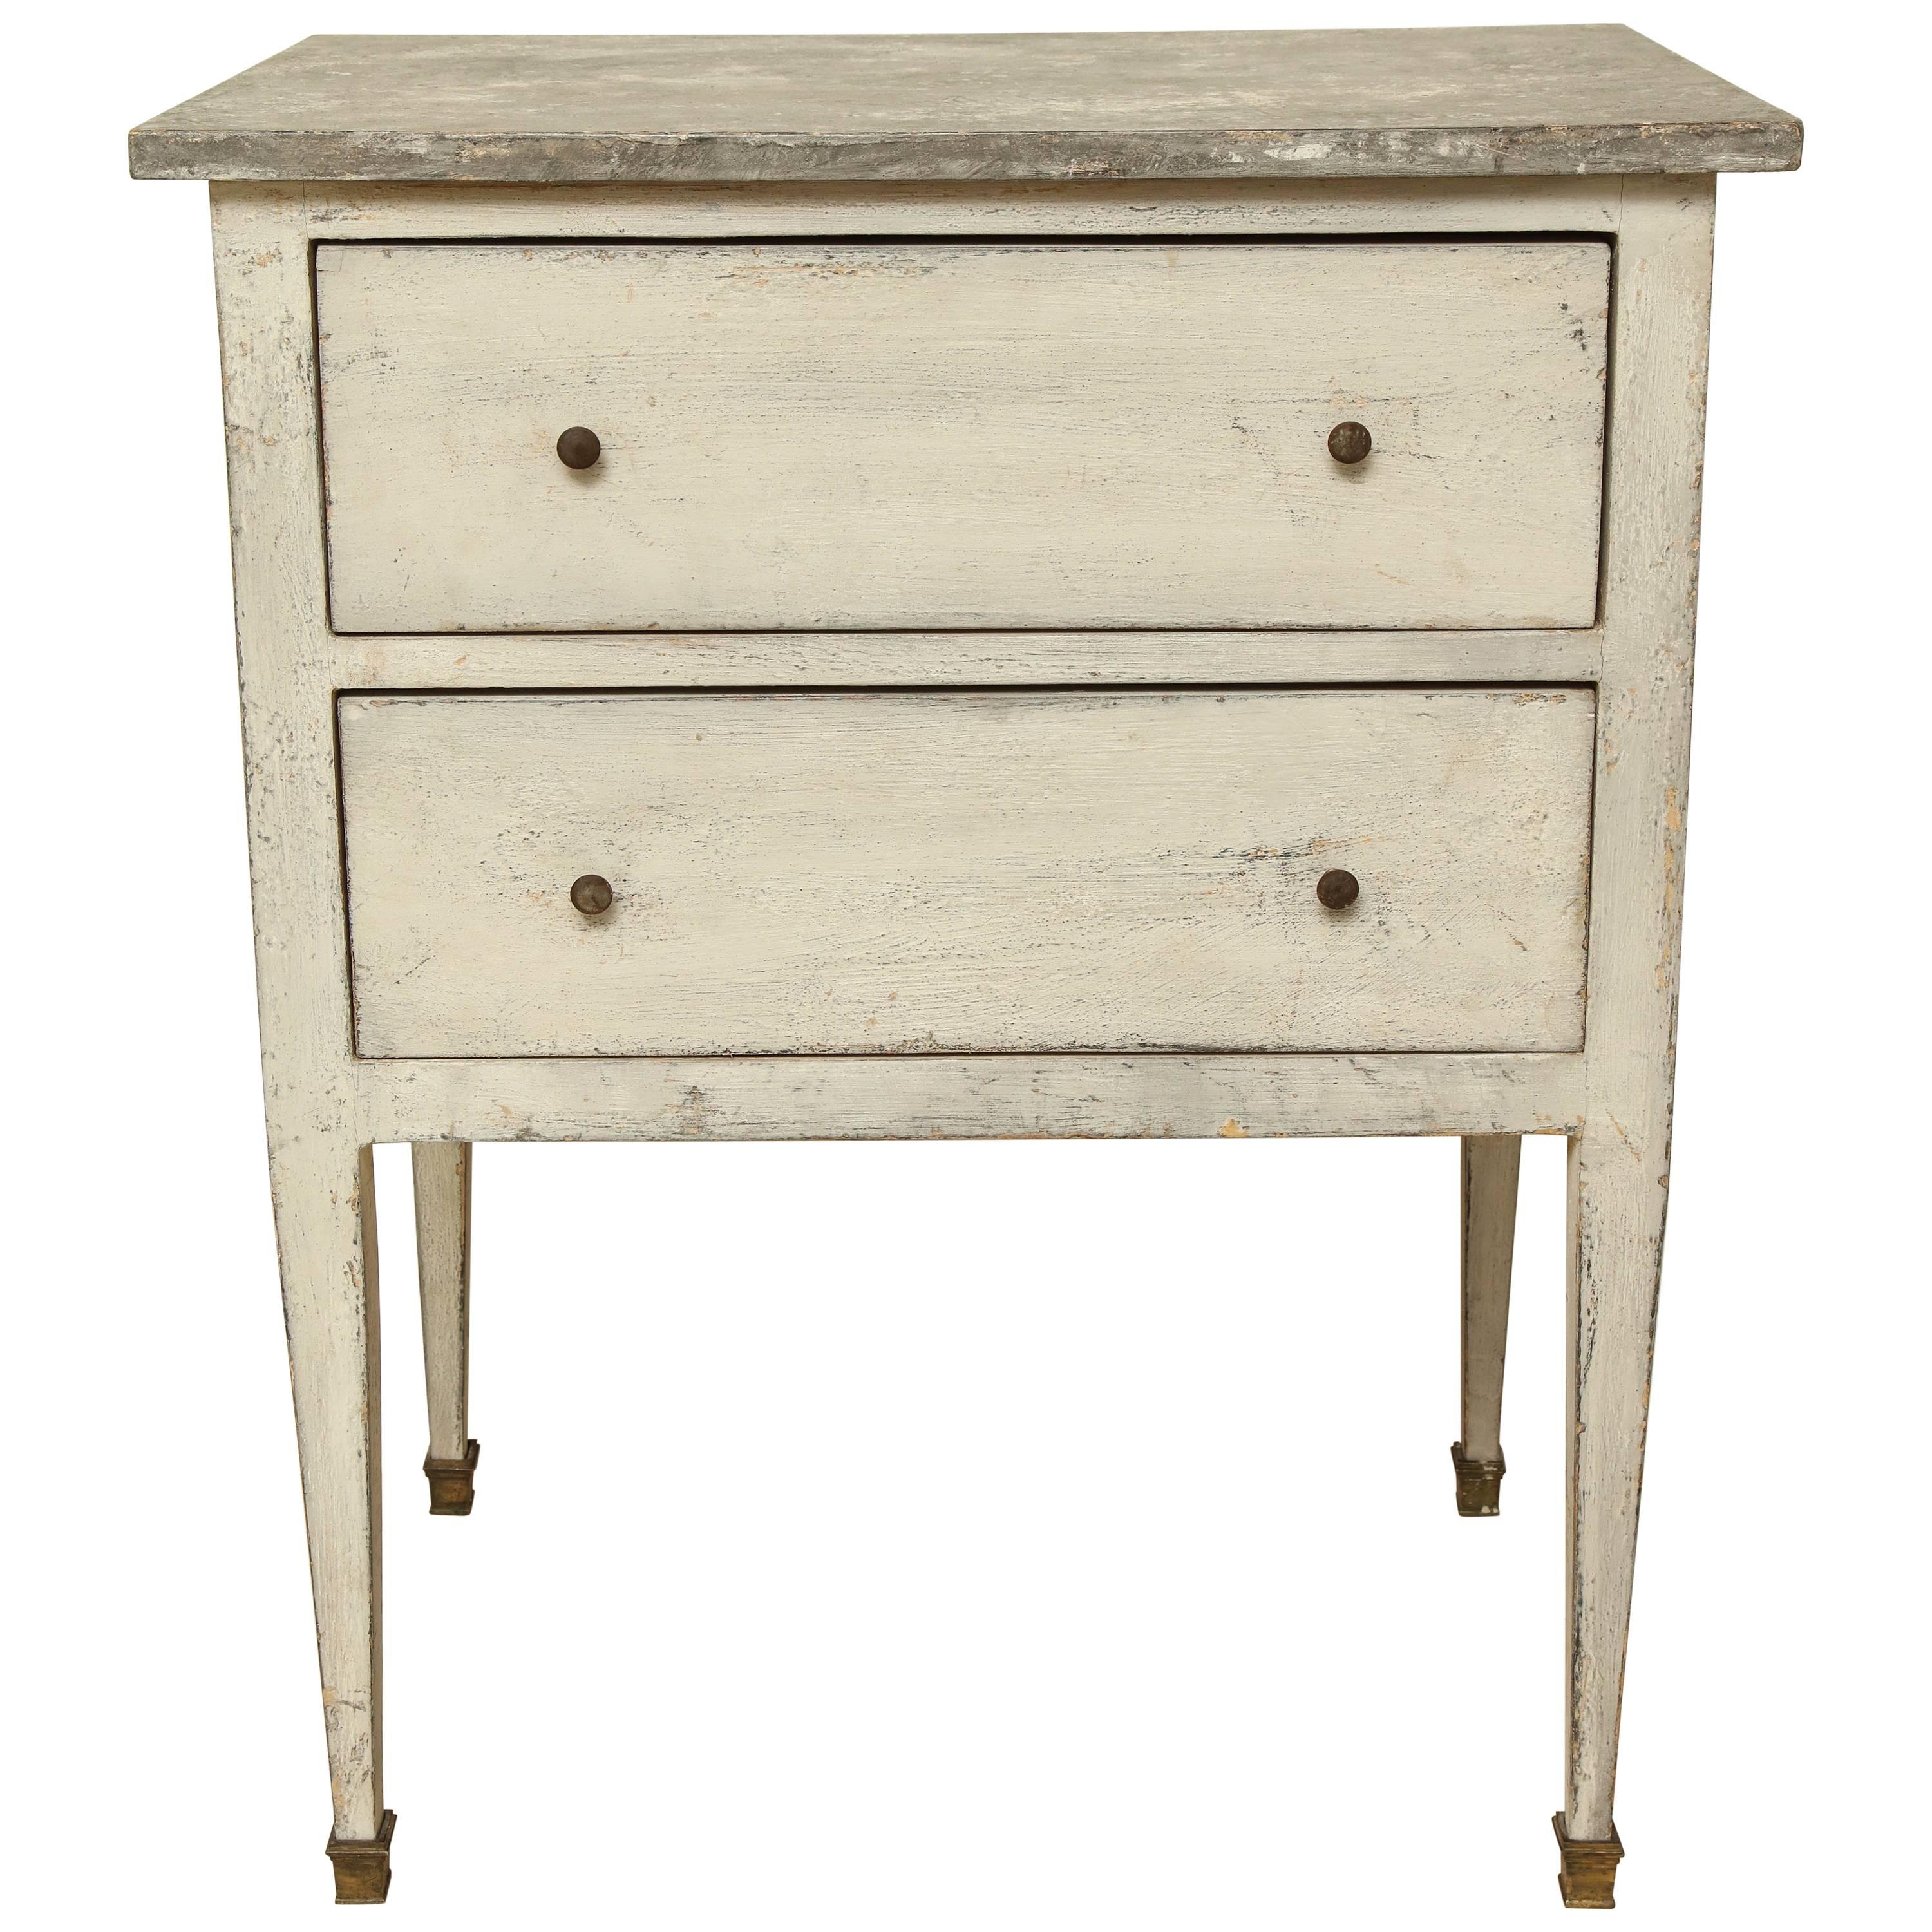 Small, Painted White Two-Drawer Commode or Nightstand, France, circa 1940